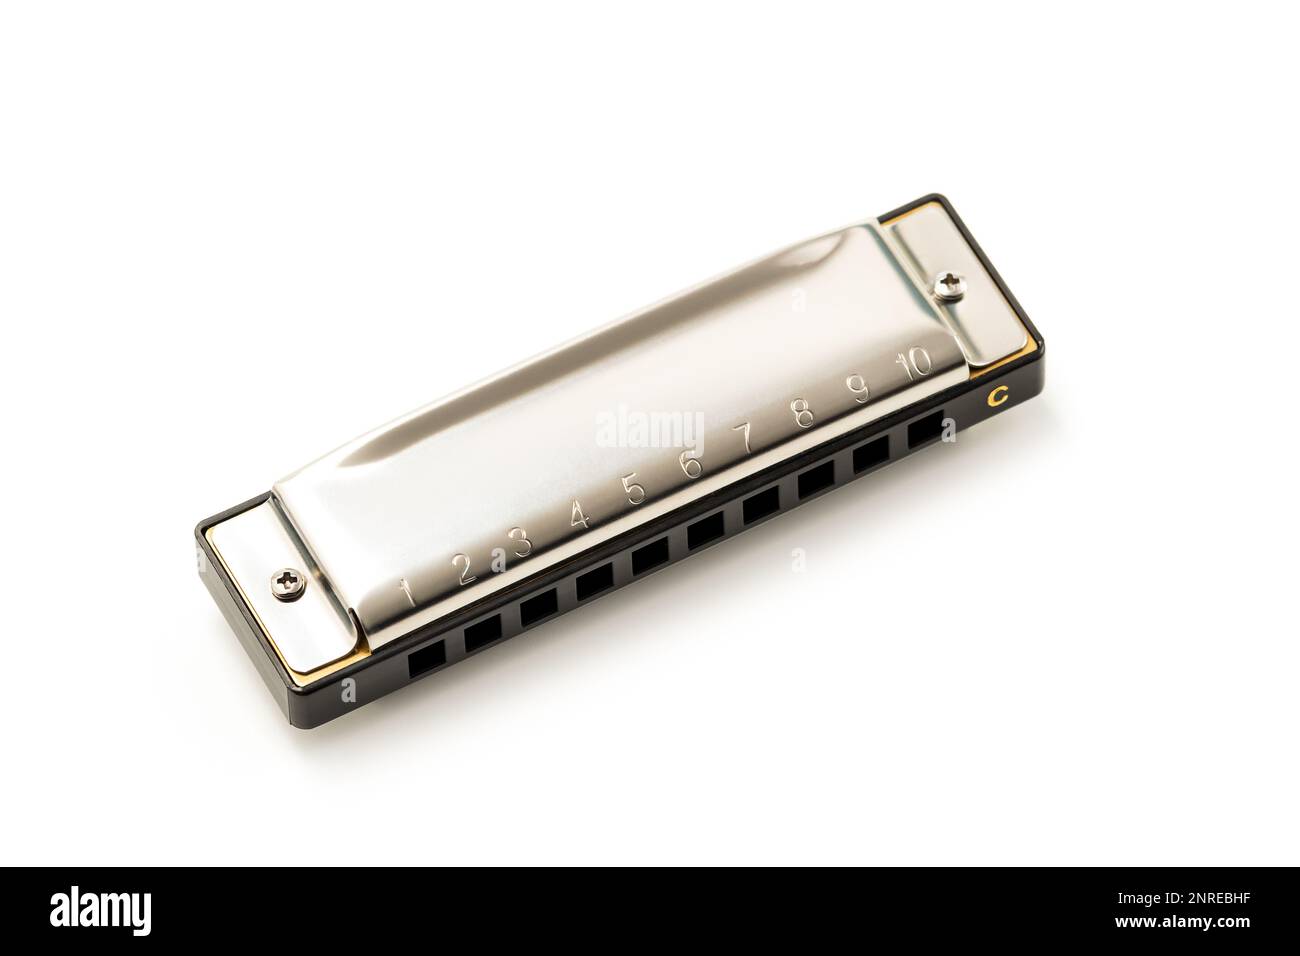 Harmonica, also French harp, blues harp, and mouth organ, isolated on white background with clipping path included. Free reed wind instrument Stock Photo